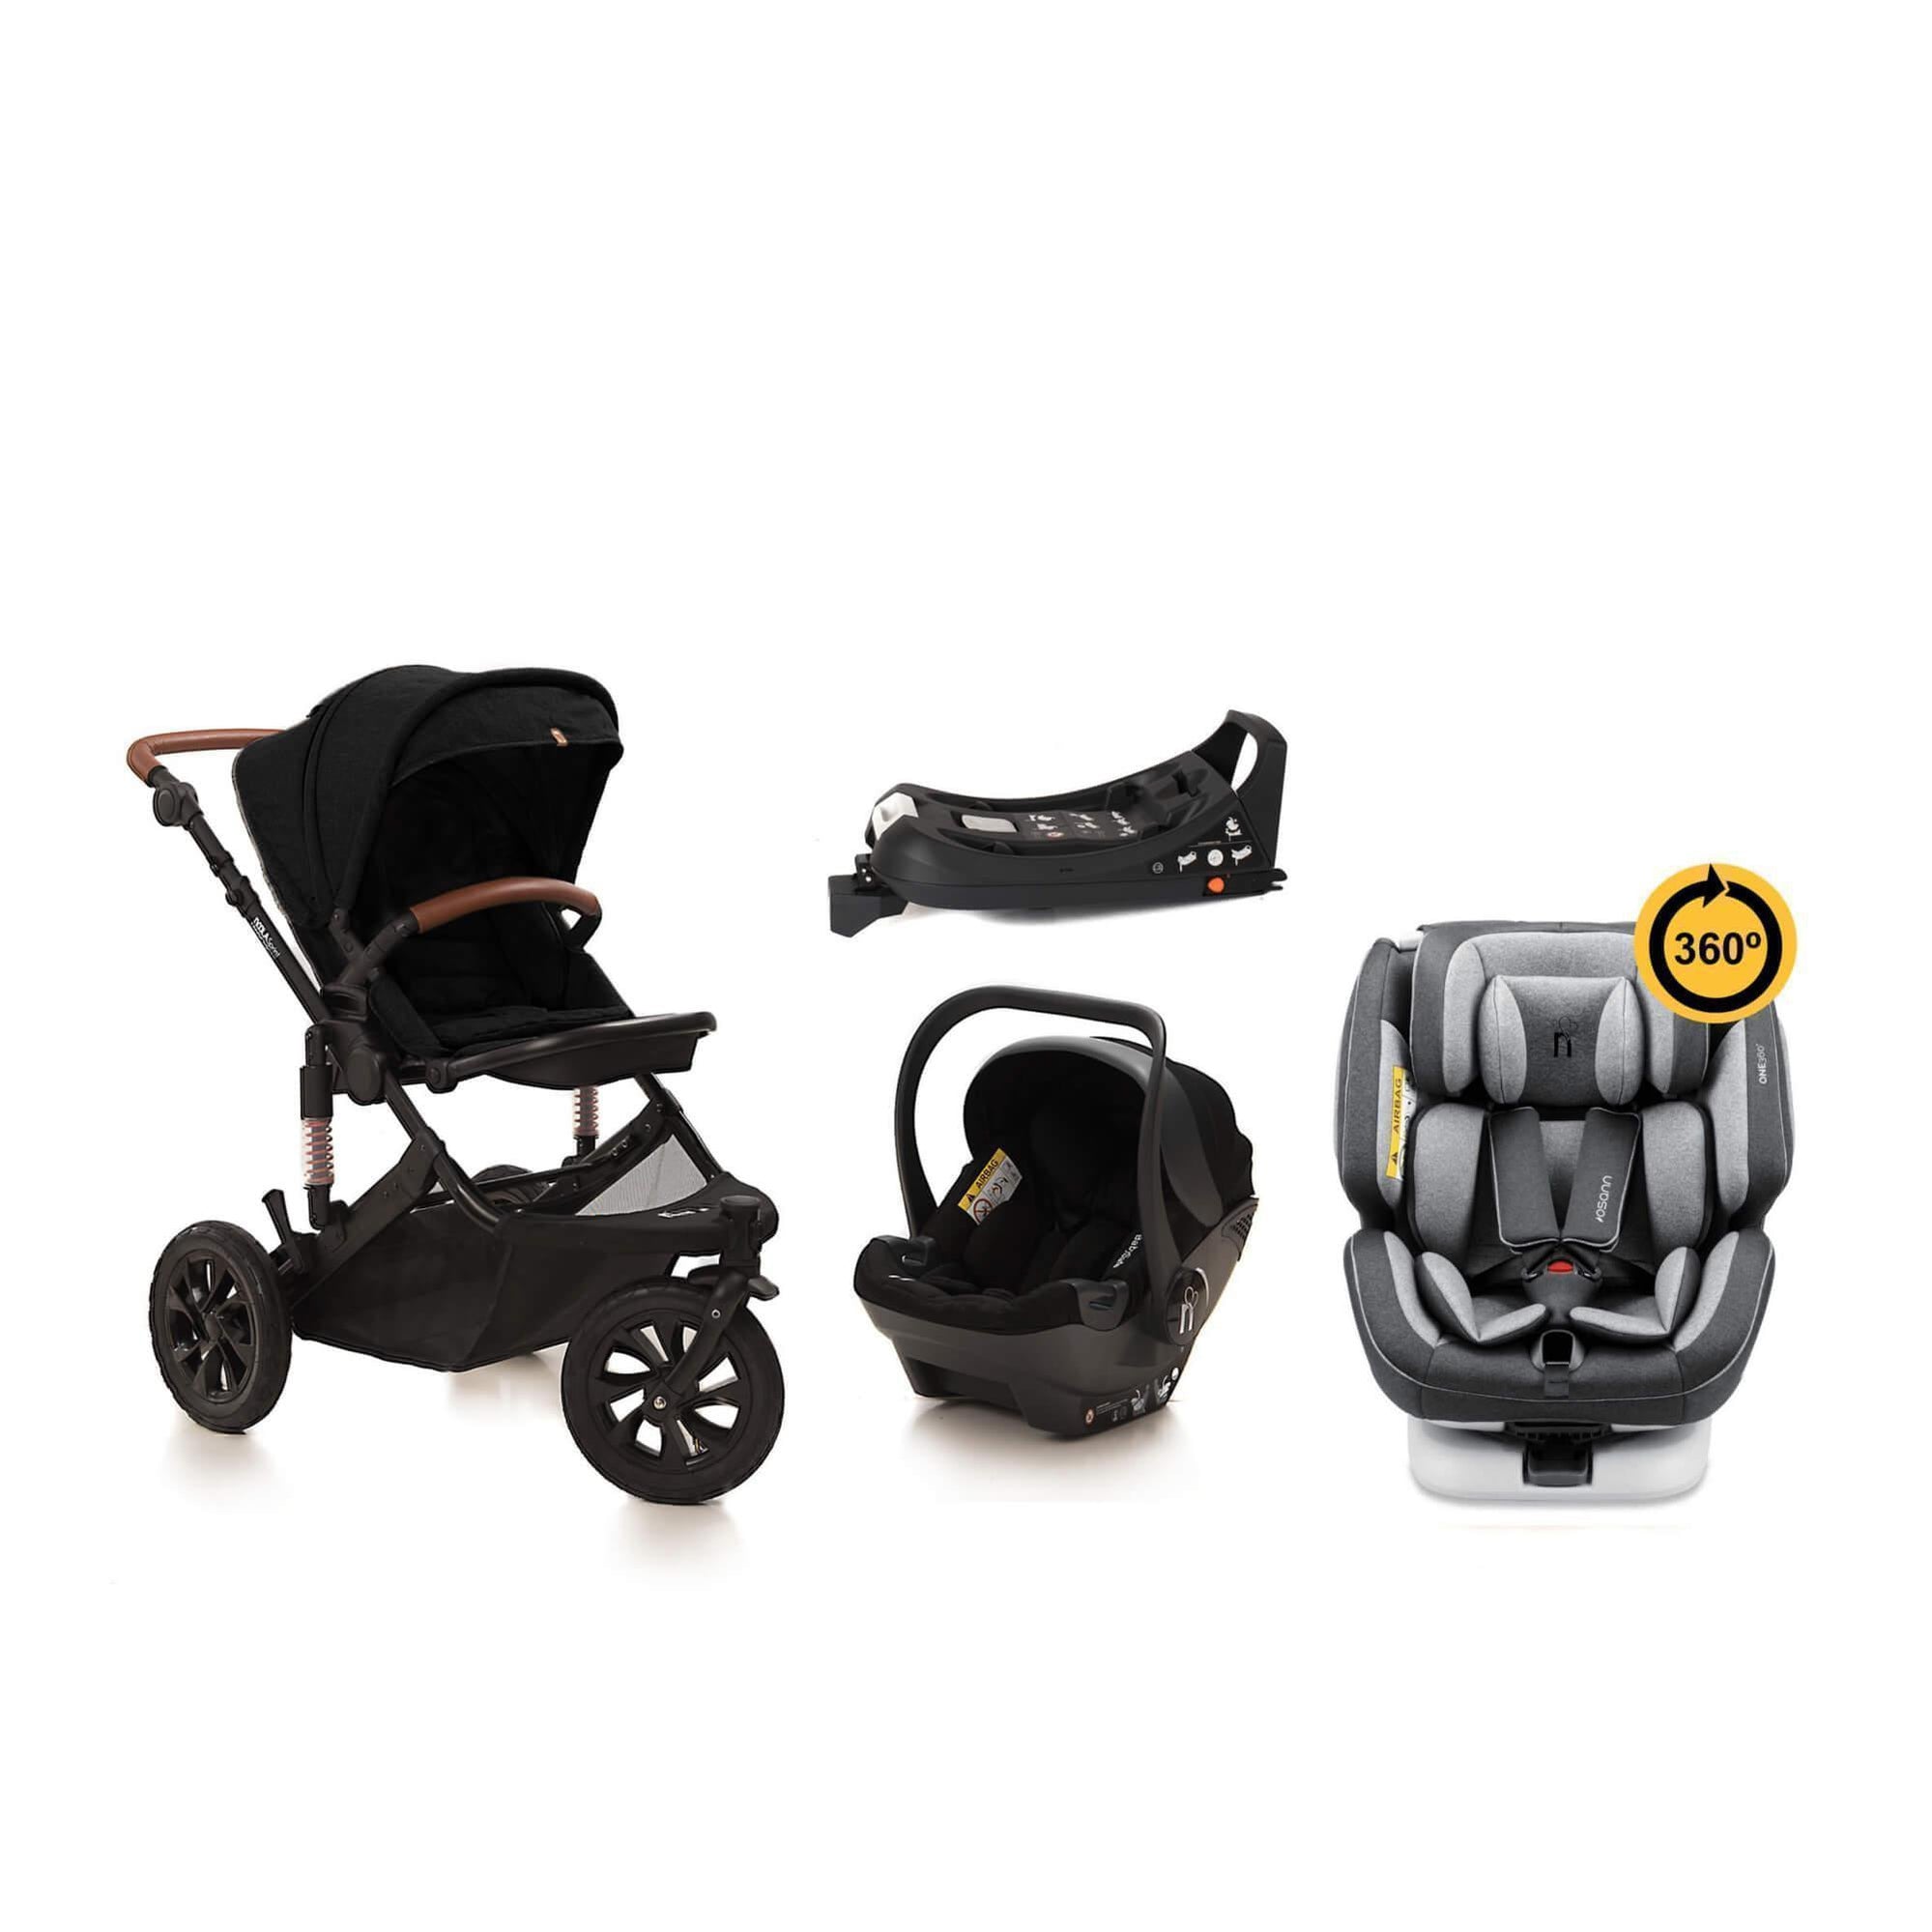 noola sprint 5in1 midnight black travel system baby stroller #SELECT THE COLOUR OF YOUR ONE360_ONE360 | LUNAR GREY